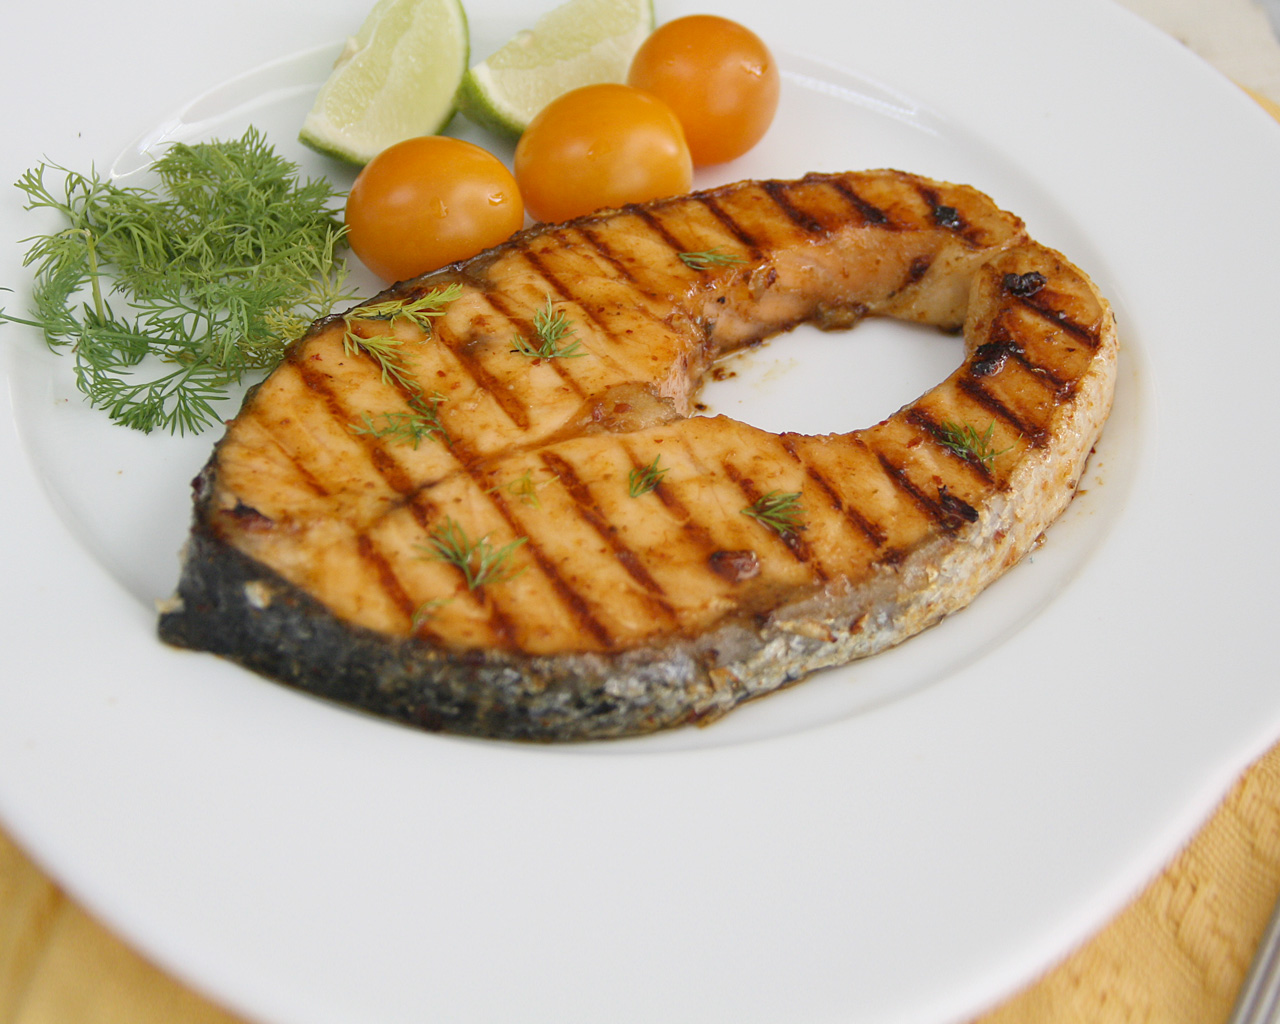 Simply Grilled Salmon